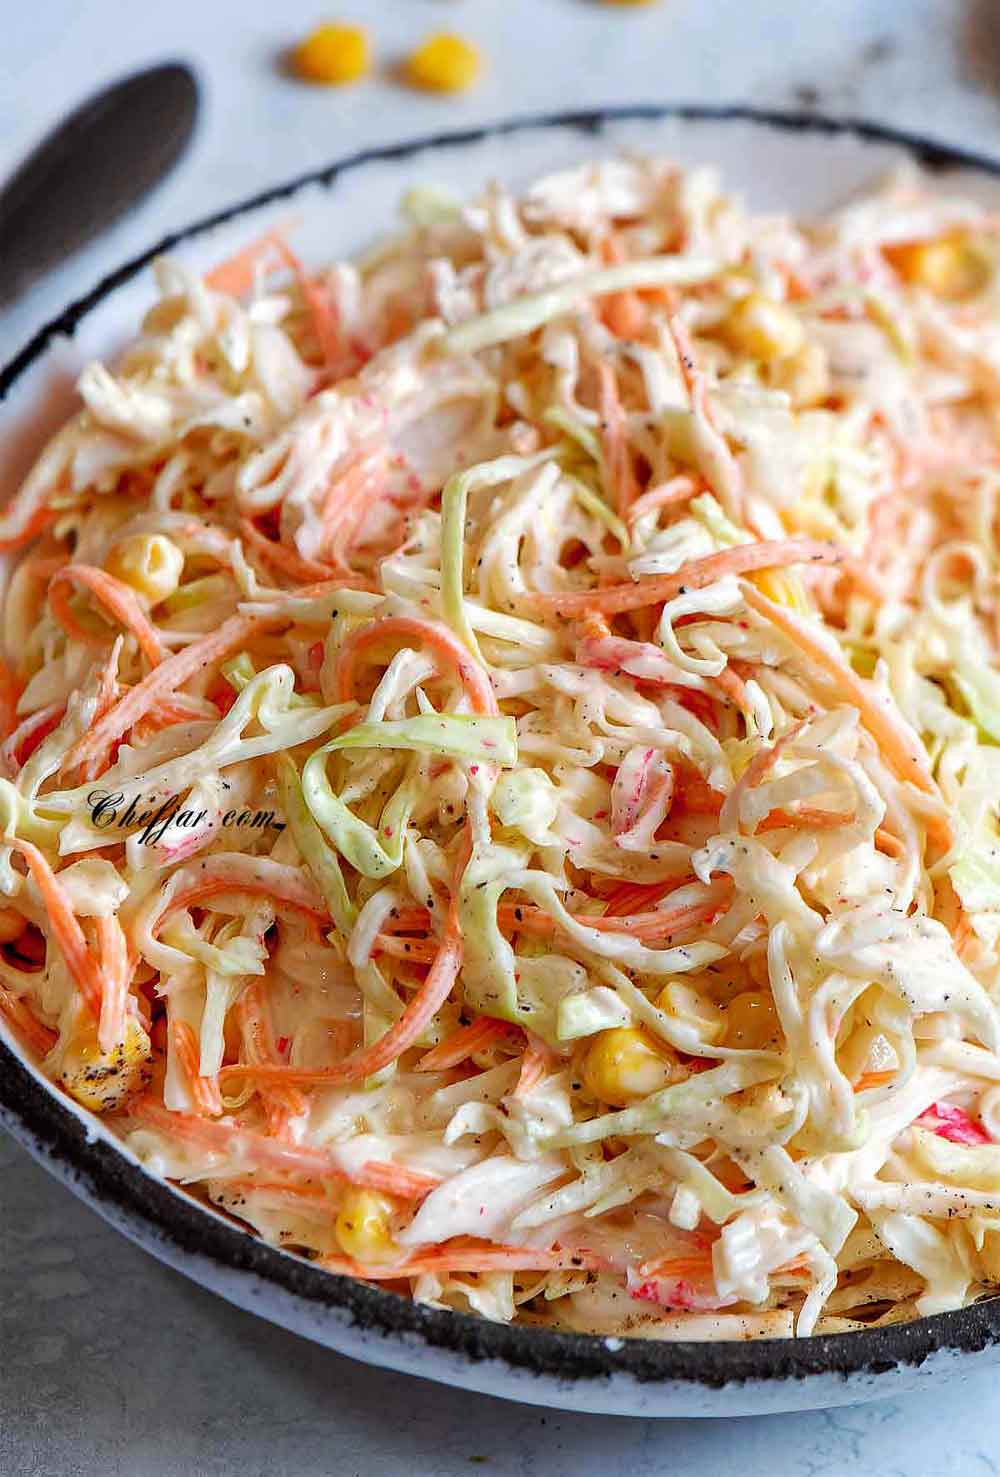 imitation-crab-meat-and-cabbage-salad